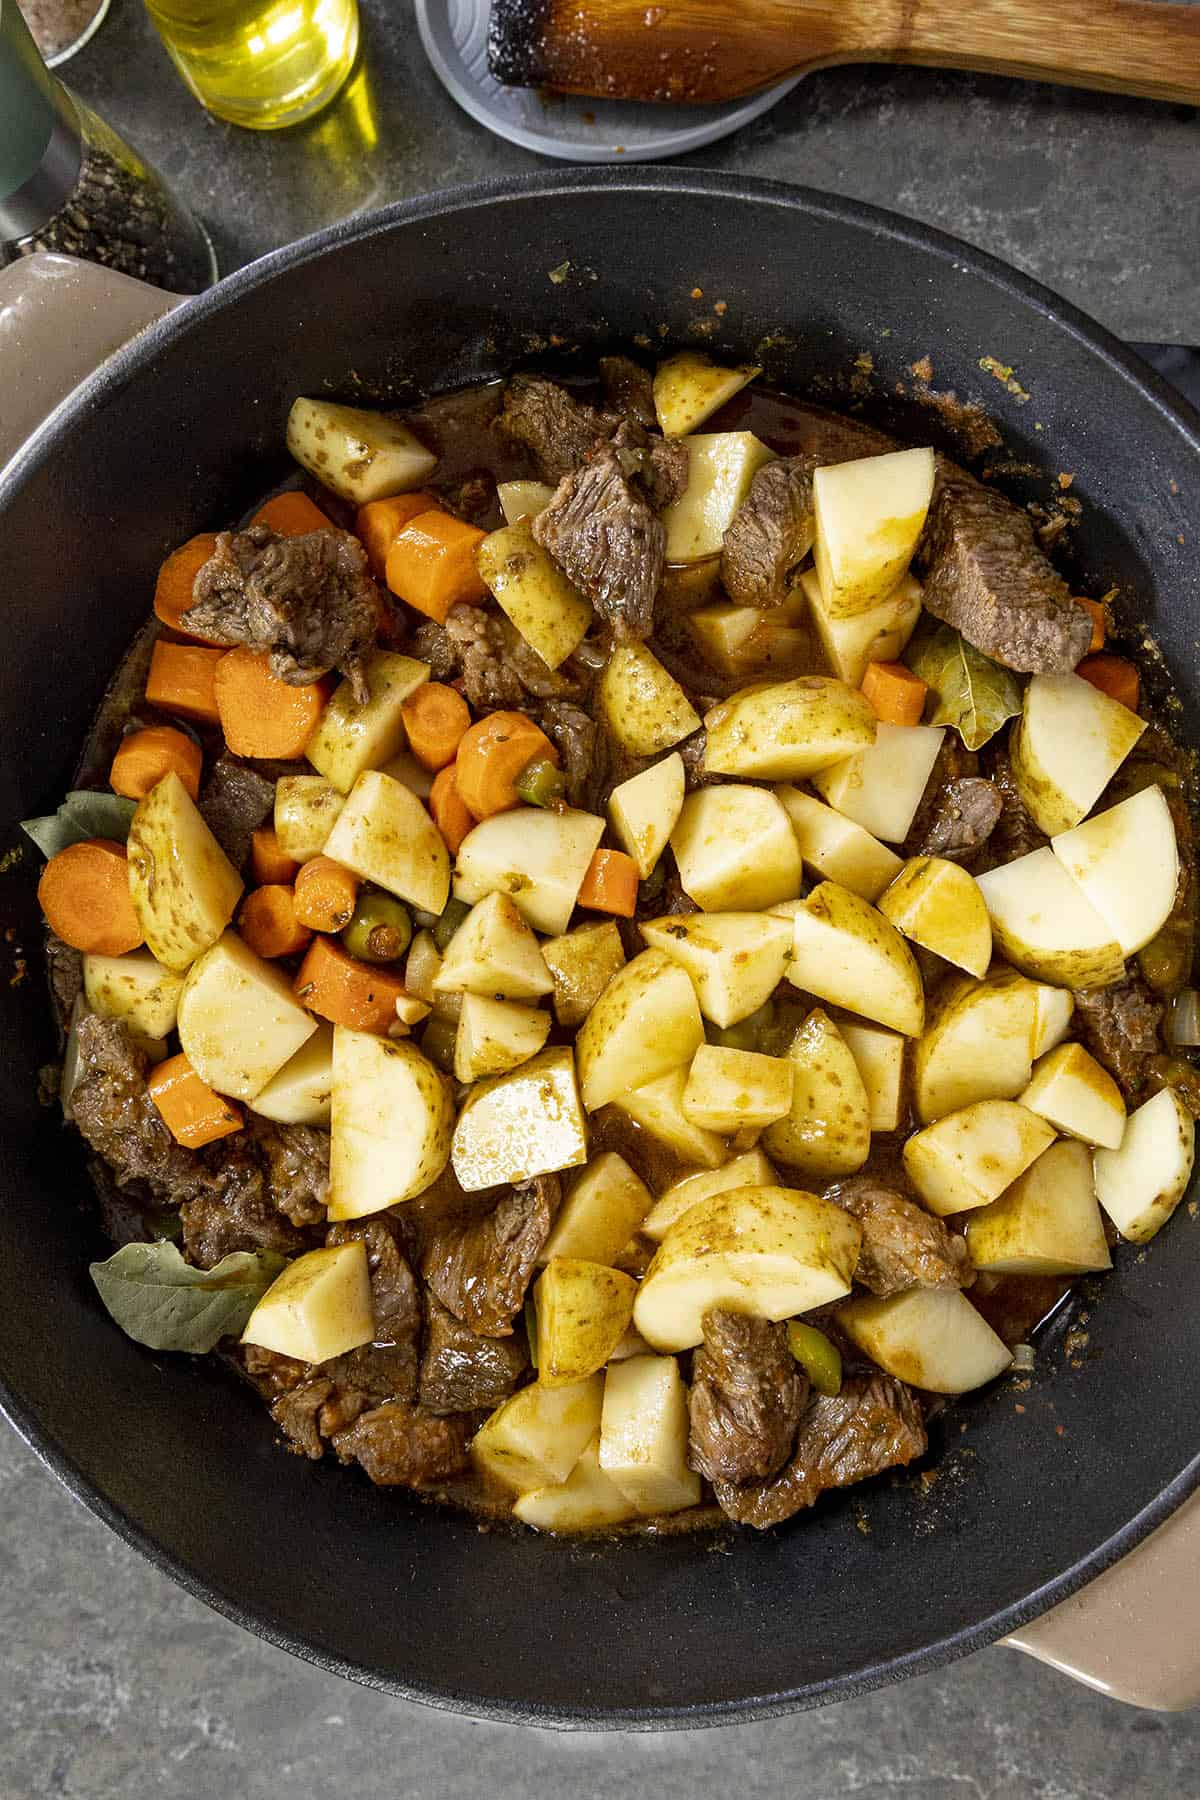 Simmering the root vegetables with the Carne Guisada